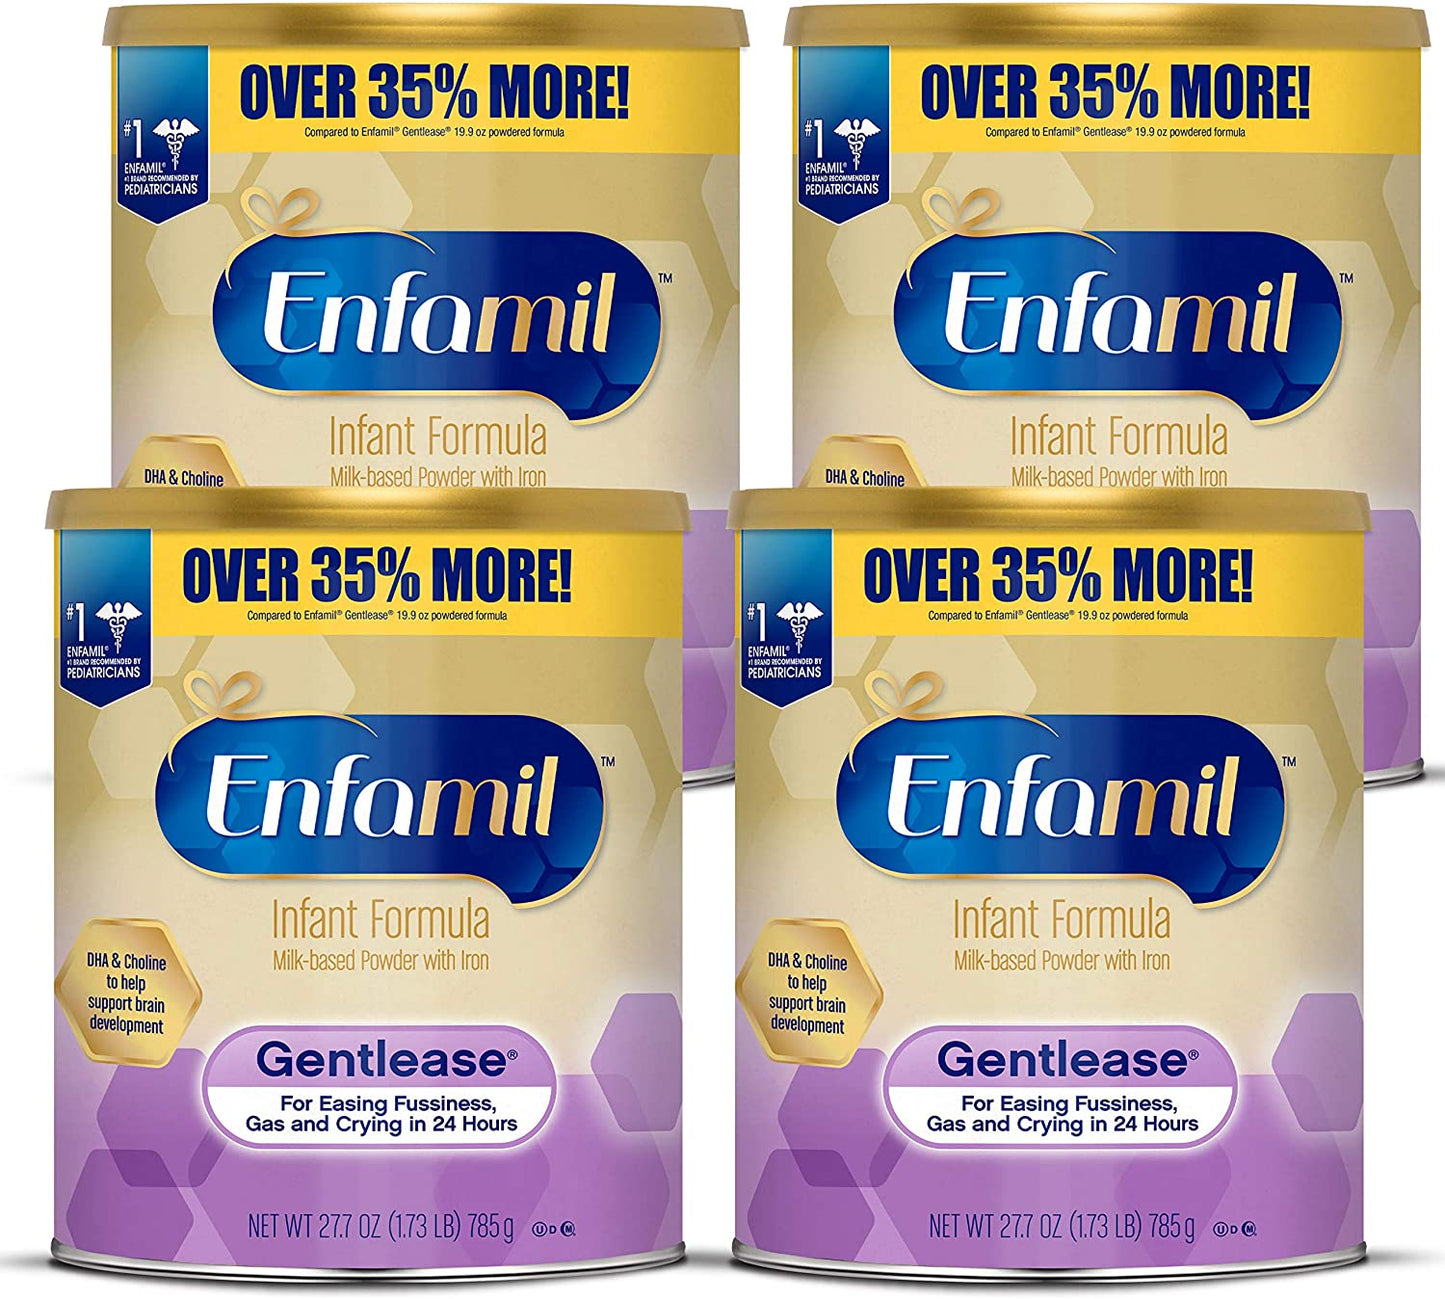 Enfamil Gentlease Baby Formula, Reduces Fussiness, Gas, Crying and Spit-up  in 24 hours, DHA & Choline to support Brain development, Powder Can, 19.9  Oz 